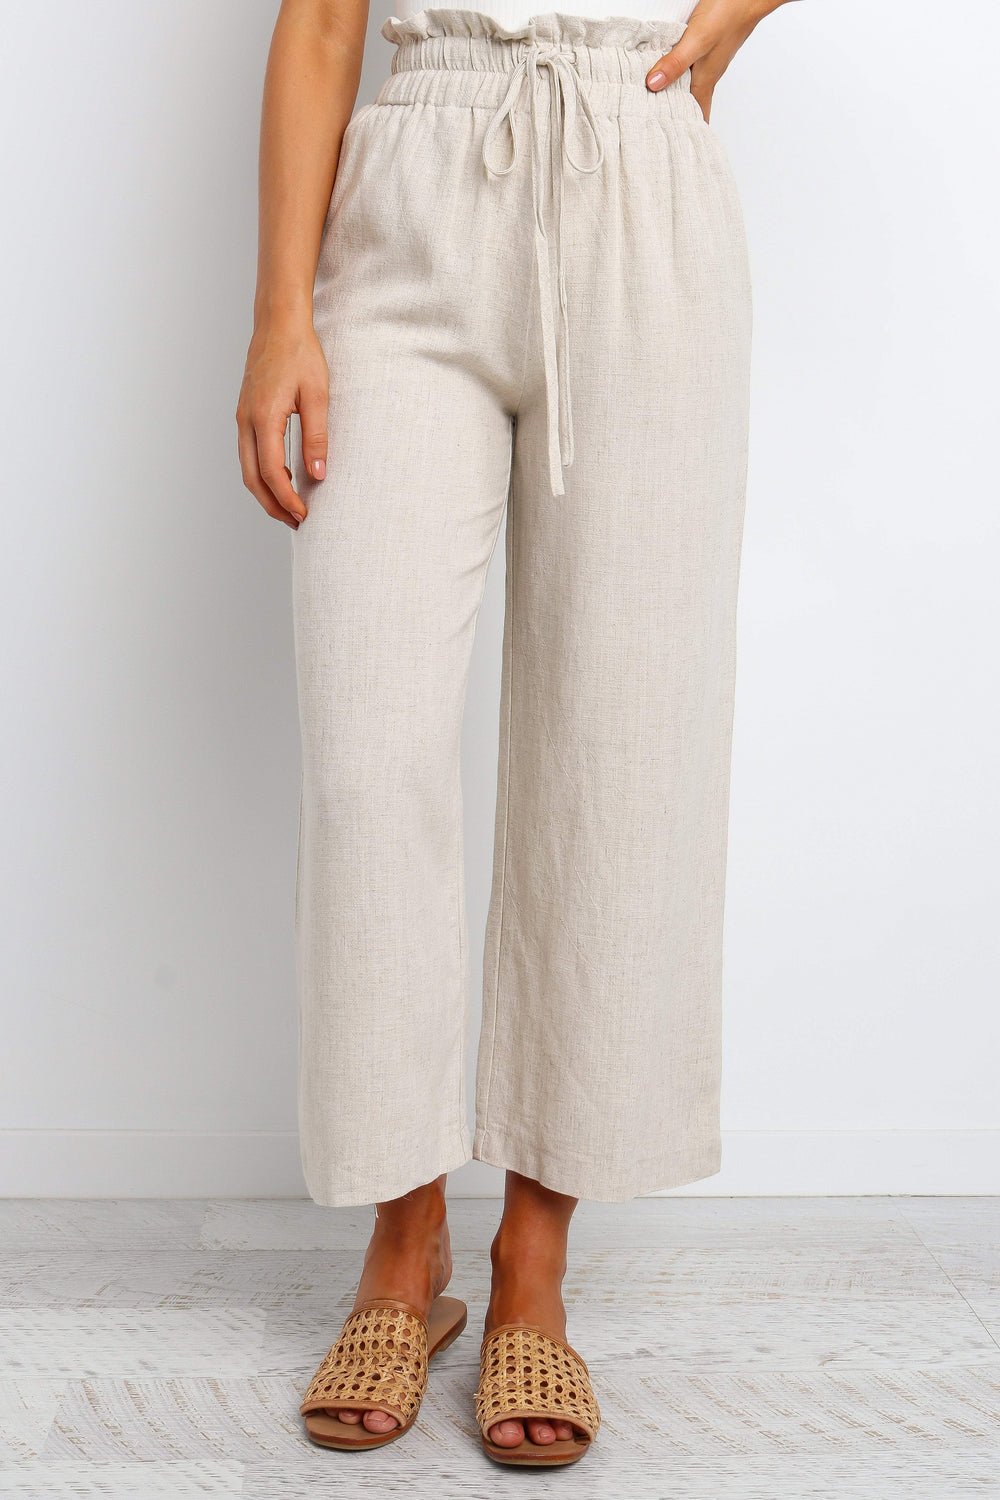 Petal and Pup USA BOTTOMS Hawthorne Pant - Beige